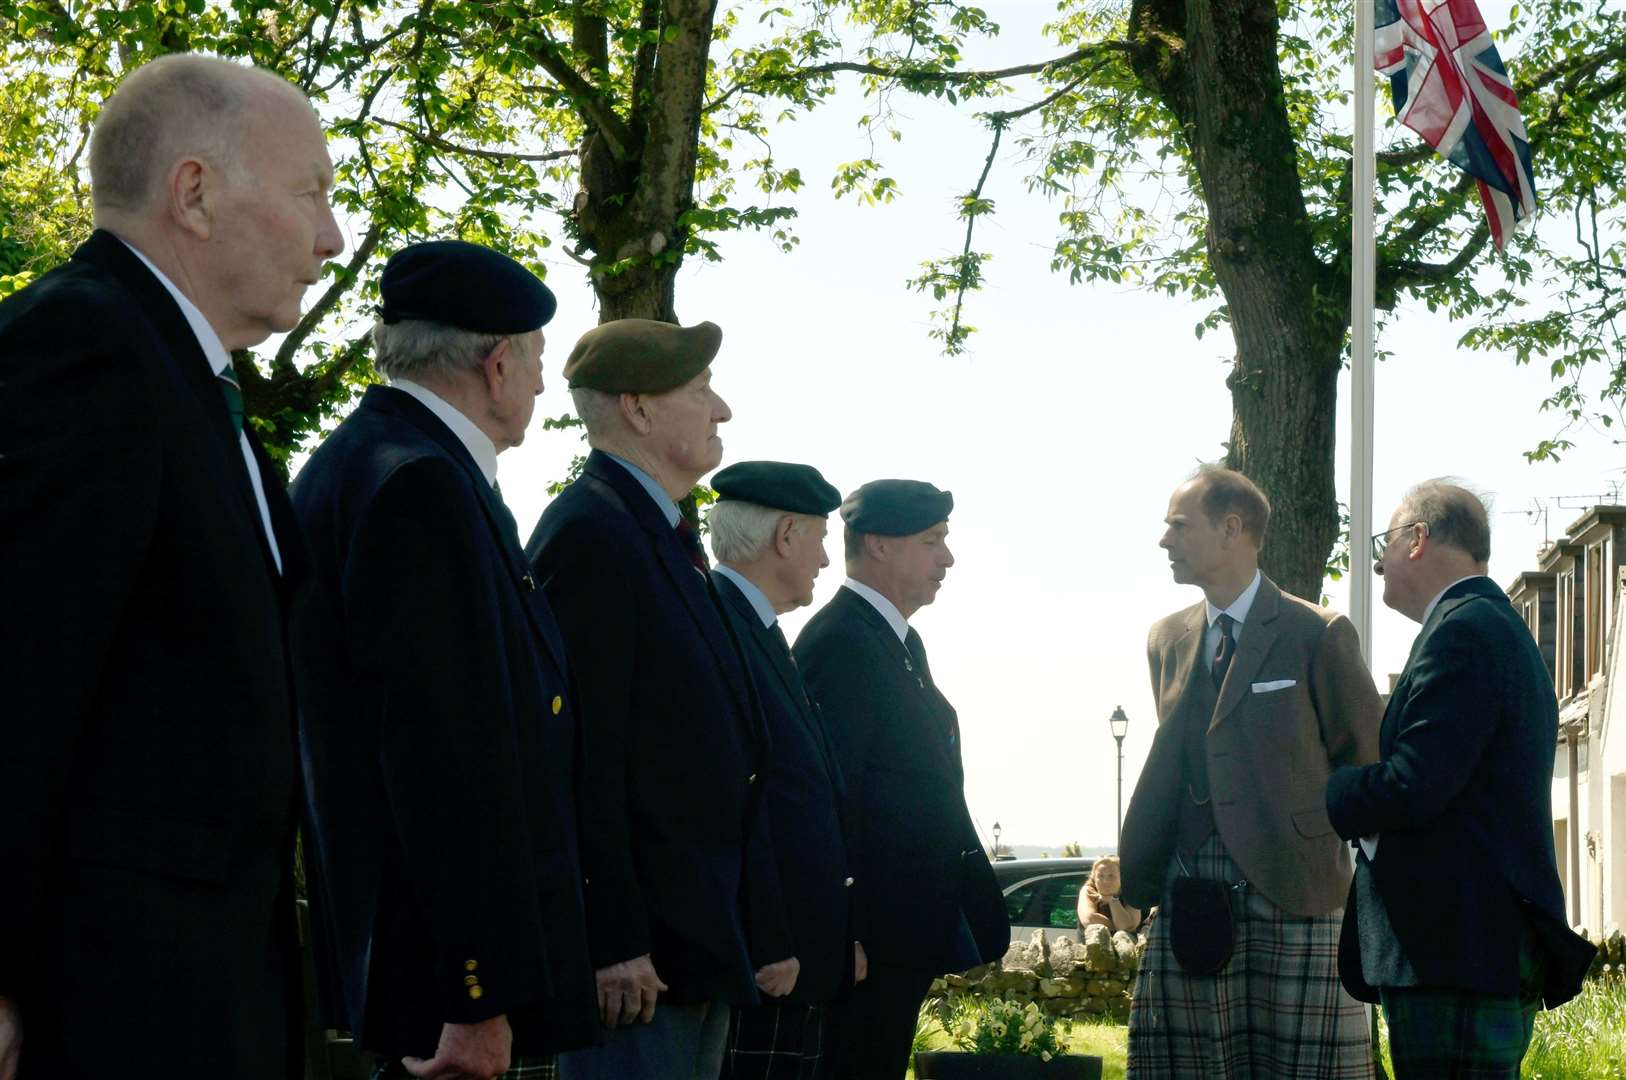 Prince Edward is presented to veterans at Golspie's Memorial Garden. Picture: James MacKenzie